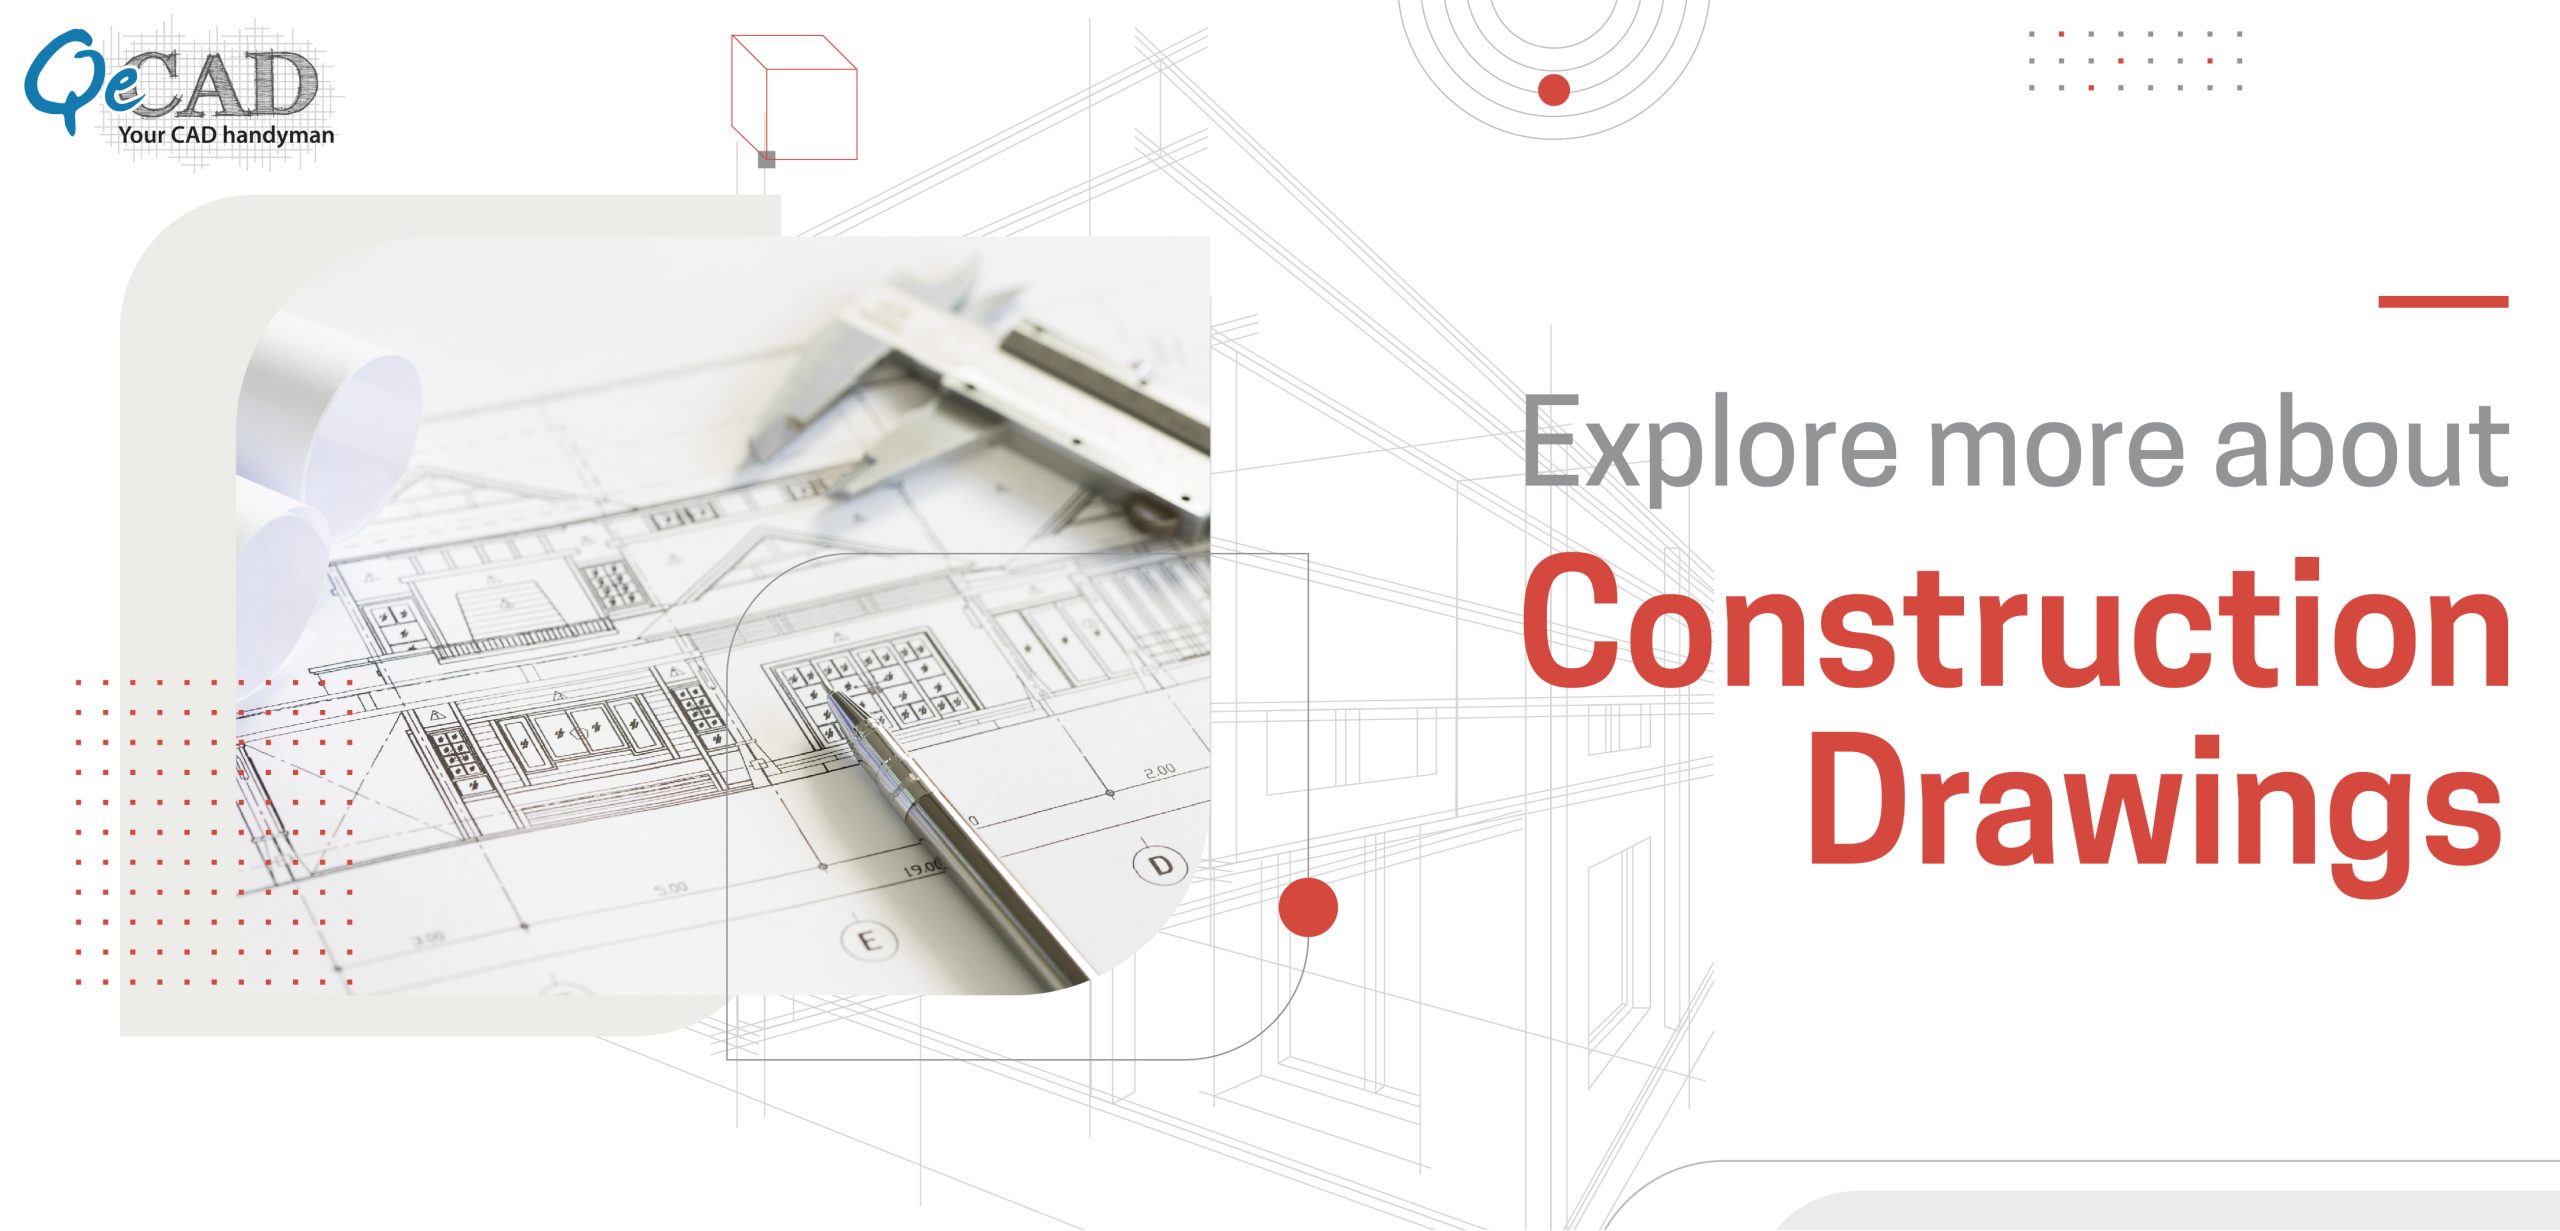 Explore more about Construction Drawings